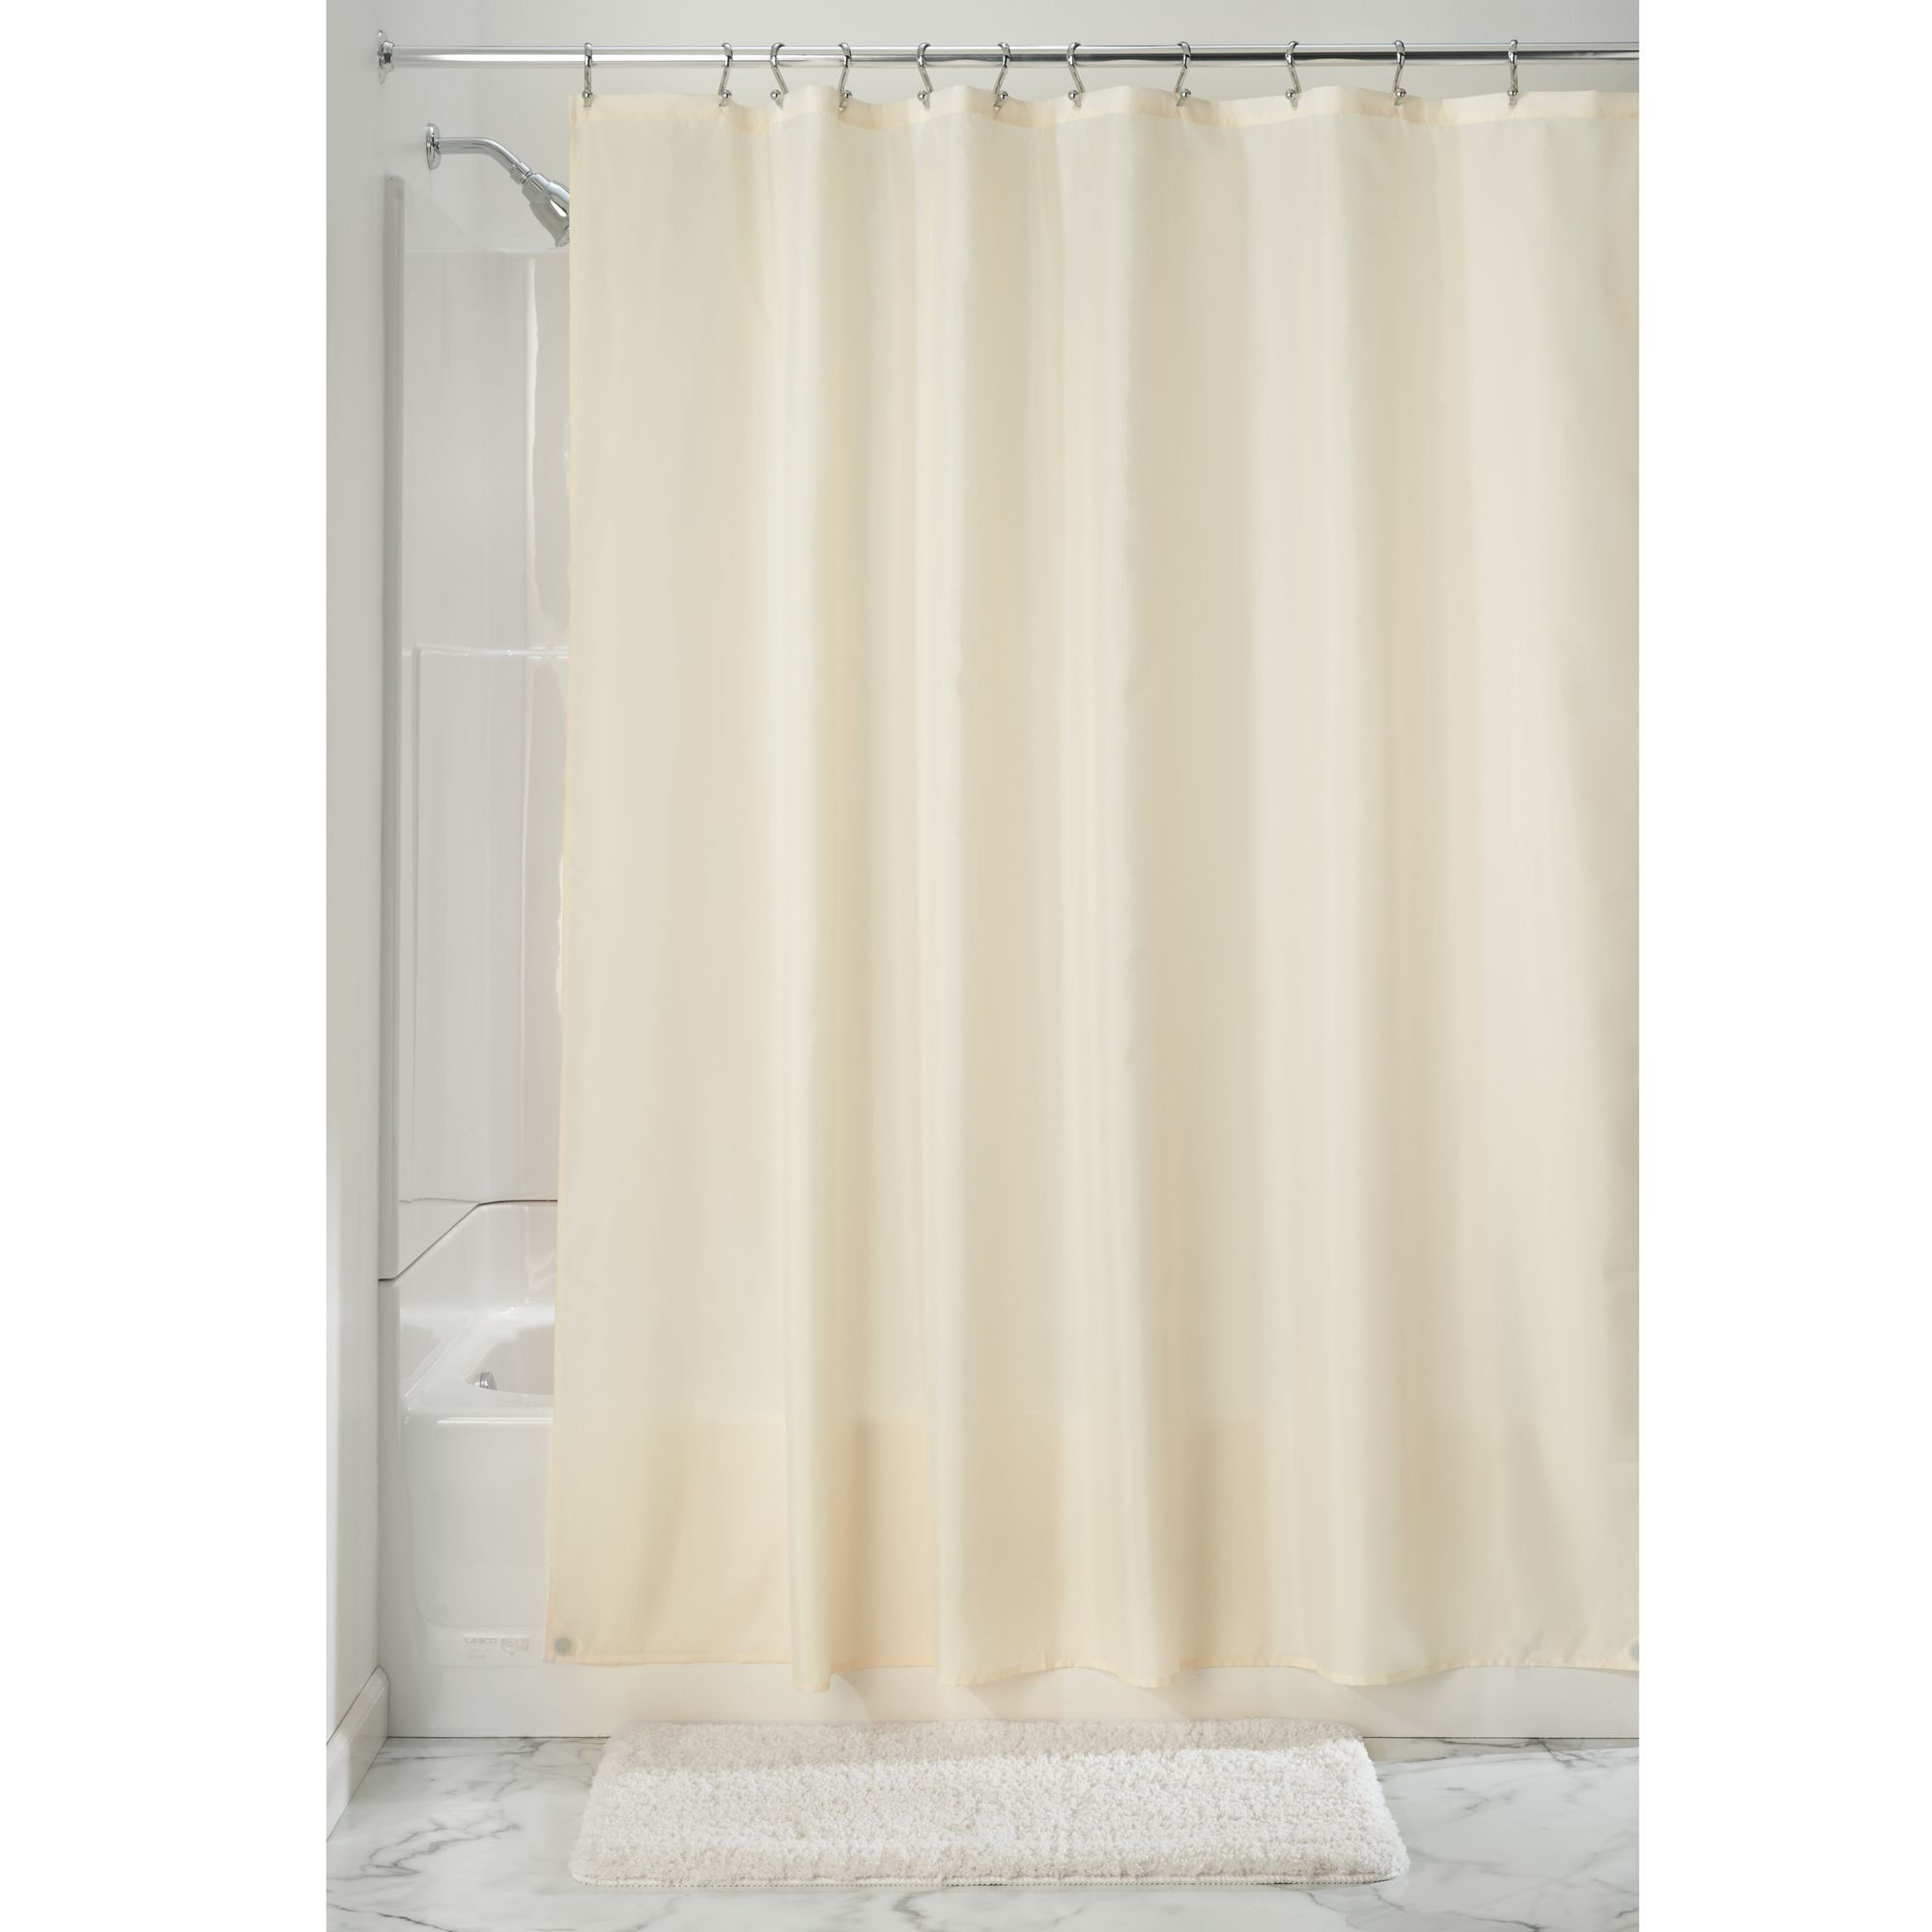 A Pebble Sand Waterproof Bathroom Polyester Shower Curtain Liner Water Resistant